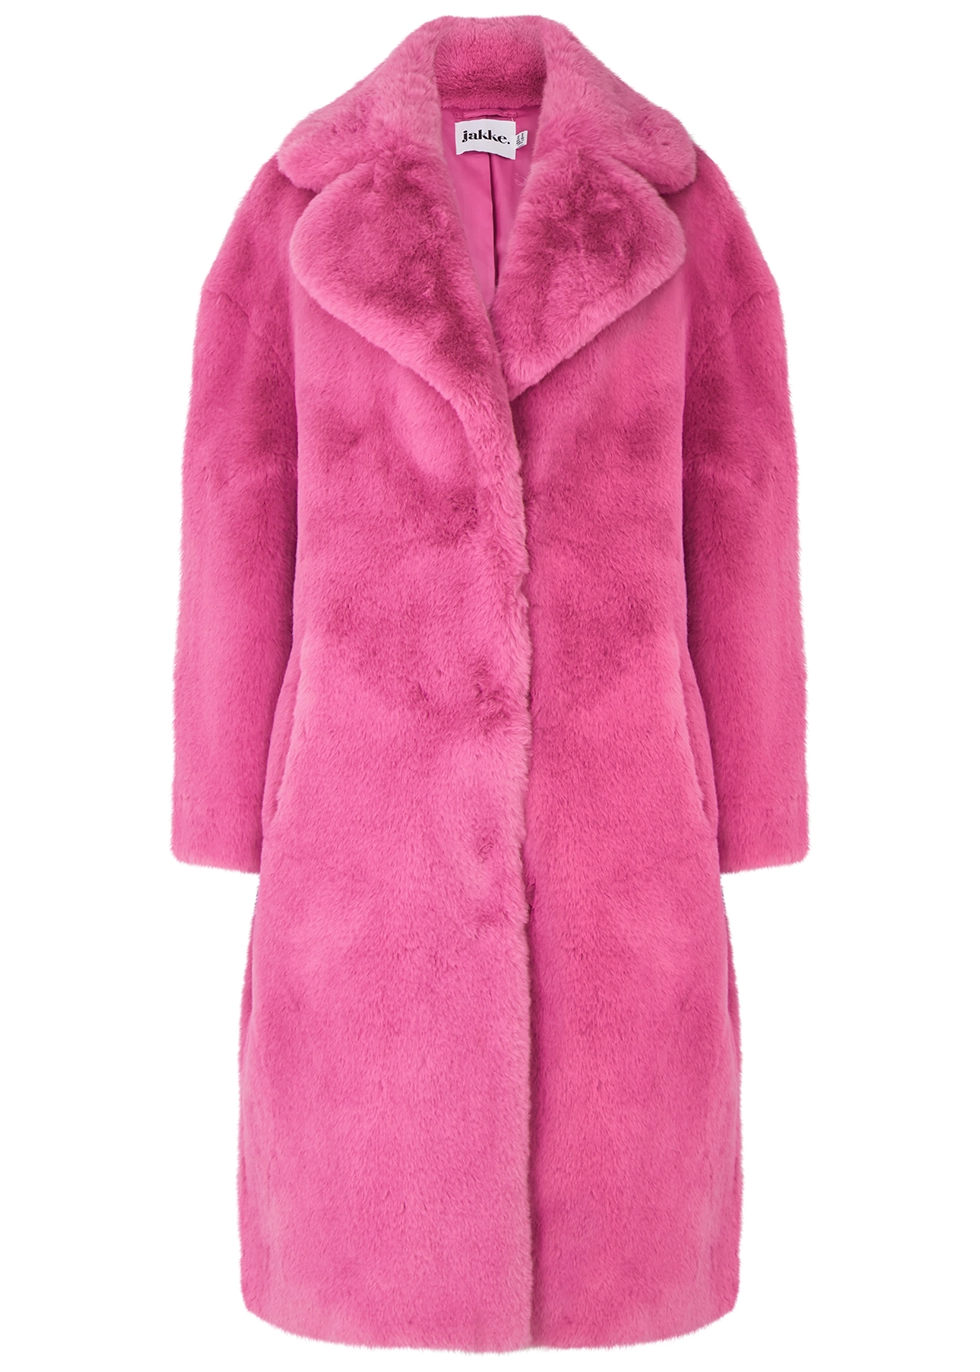 Chic Ways to Style and Rock Your Fur Coats